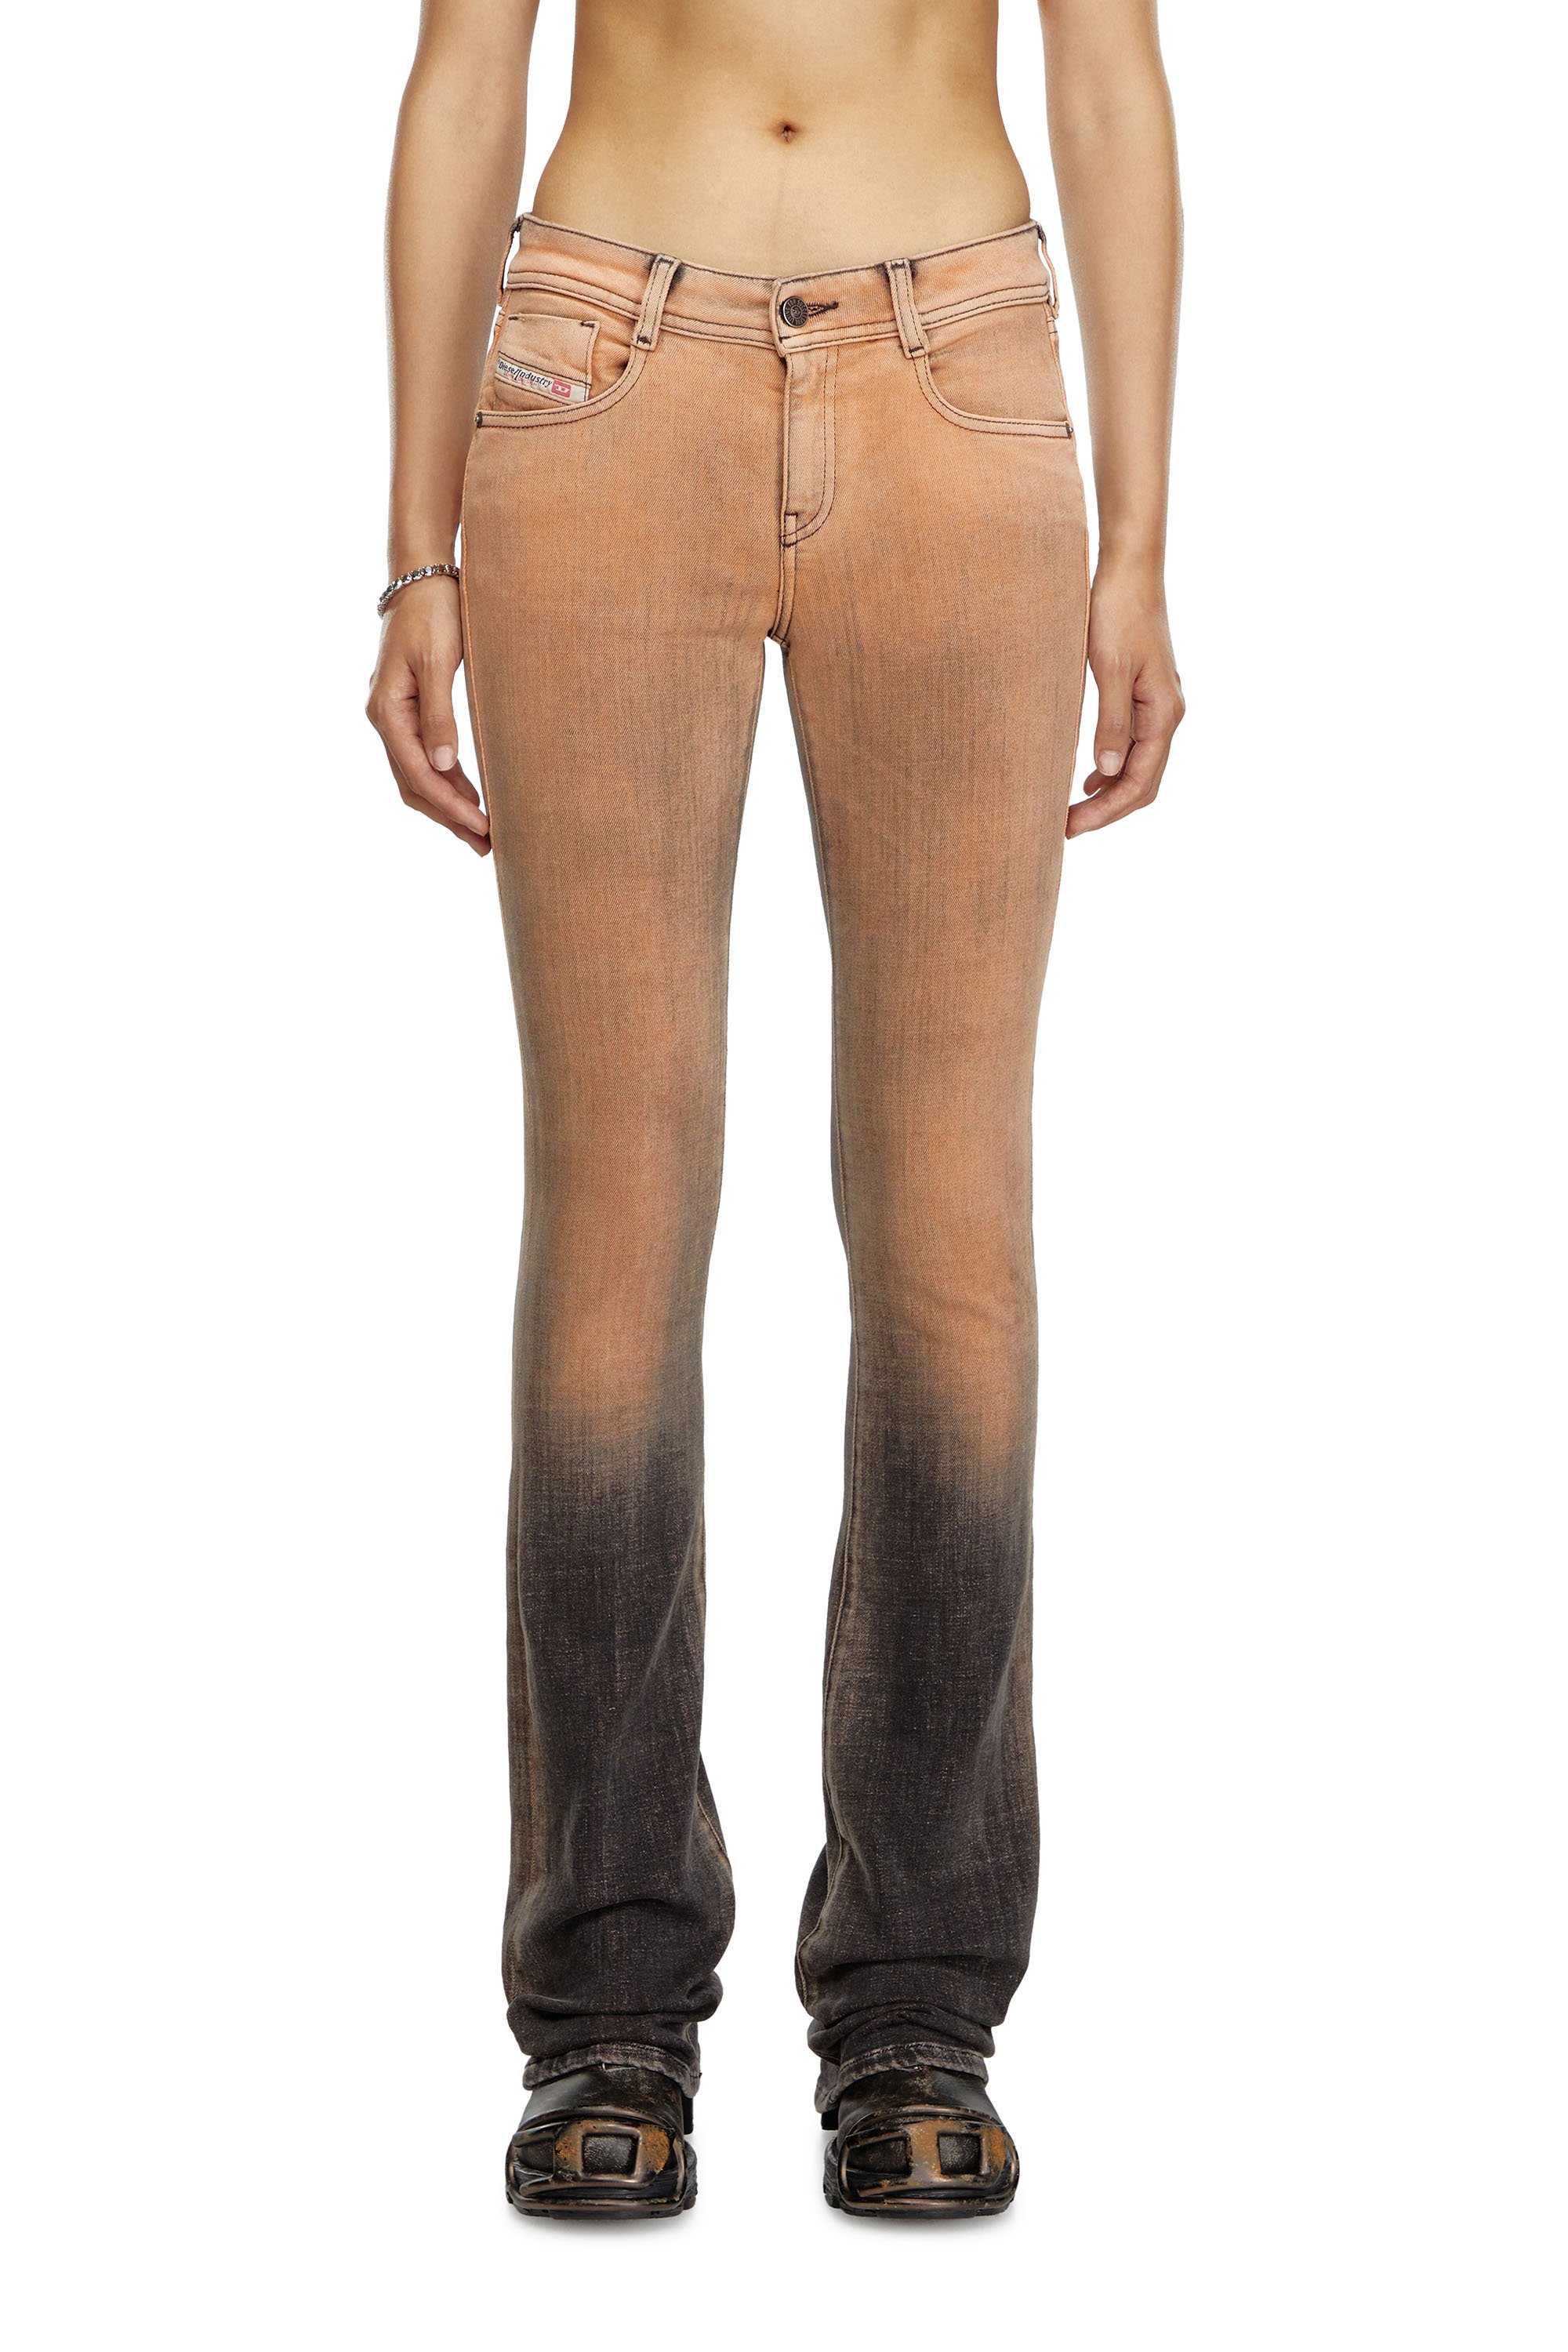 Diesel - Bootcut and Flare Jeans 1969 D-Ebbey 09K12, Mujer Bootcut y Flare Jeans - 1969 D-Ebbey in Multicolor - Image 2